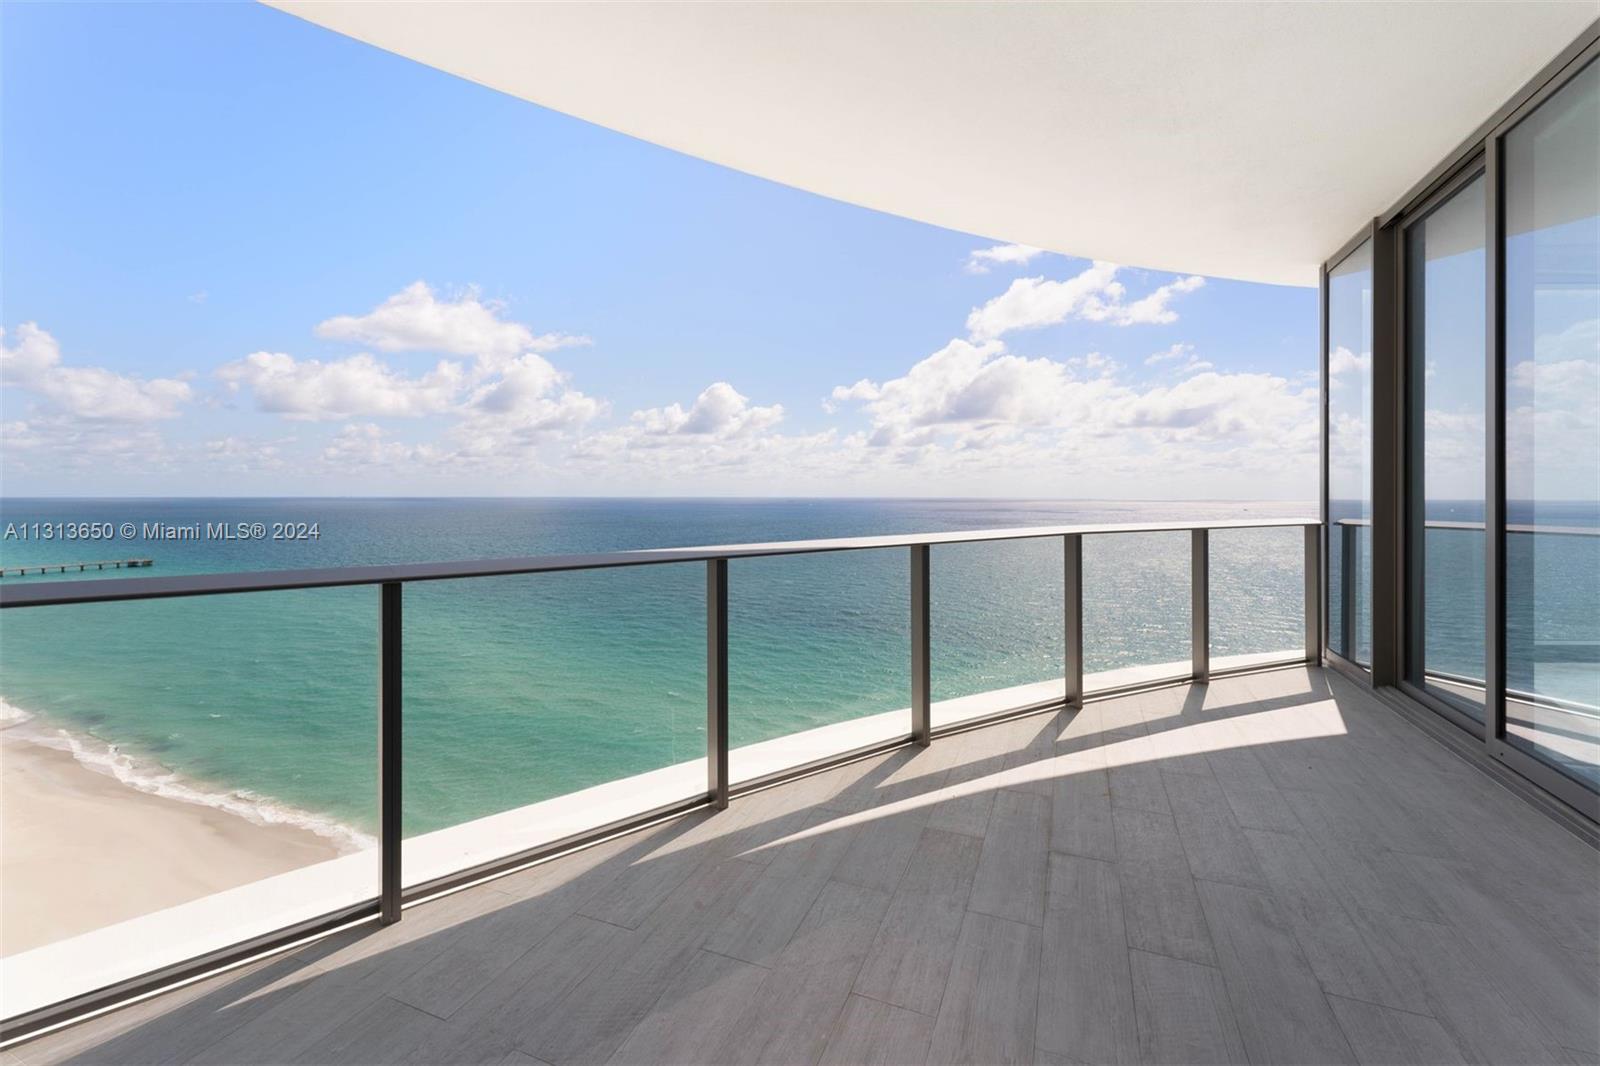 Beautiful 3 Bed plus Den in The Ritz-Carlton Residences in Sunny Isles Beach. Unobstructed Ocean and Intracostal views. Spacious flow-thru unit. 3,080 SQ SF of living area with 10ft ceilings, an Italian-designed kitchen fully equipped with Gaggenau appliances, Caesarstone quartz countertop, wine cooler, built-in cappuccino maker, etc. Virtually staged and decorated by "Artefacto'. The unit is sold unfurnished. Exceptional amenities include a 24hr Concierge, valet, gym & Spa, sunrise & sunset pools, 250 linear ft. of private beach, restaurant & beach garden, kid’s club, and a breathtaking 33rd floor Club level. Vacant, easy to show.